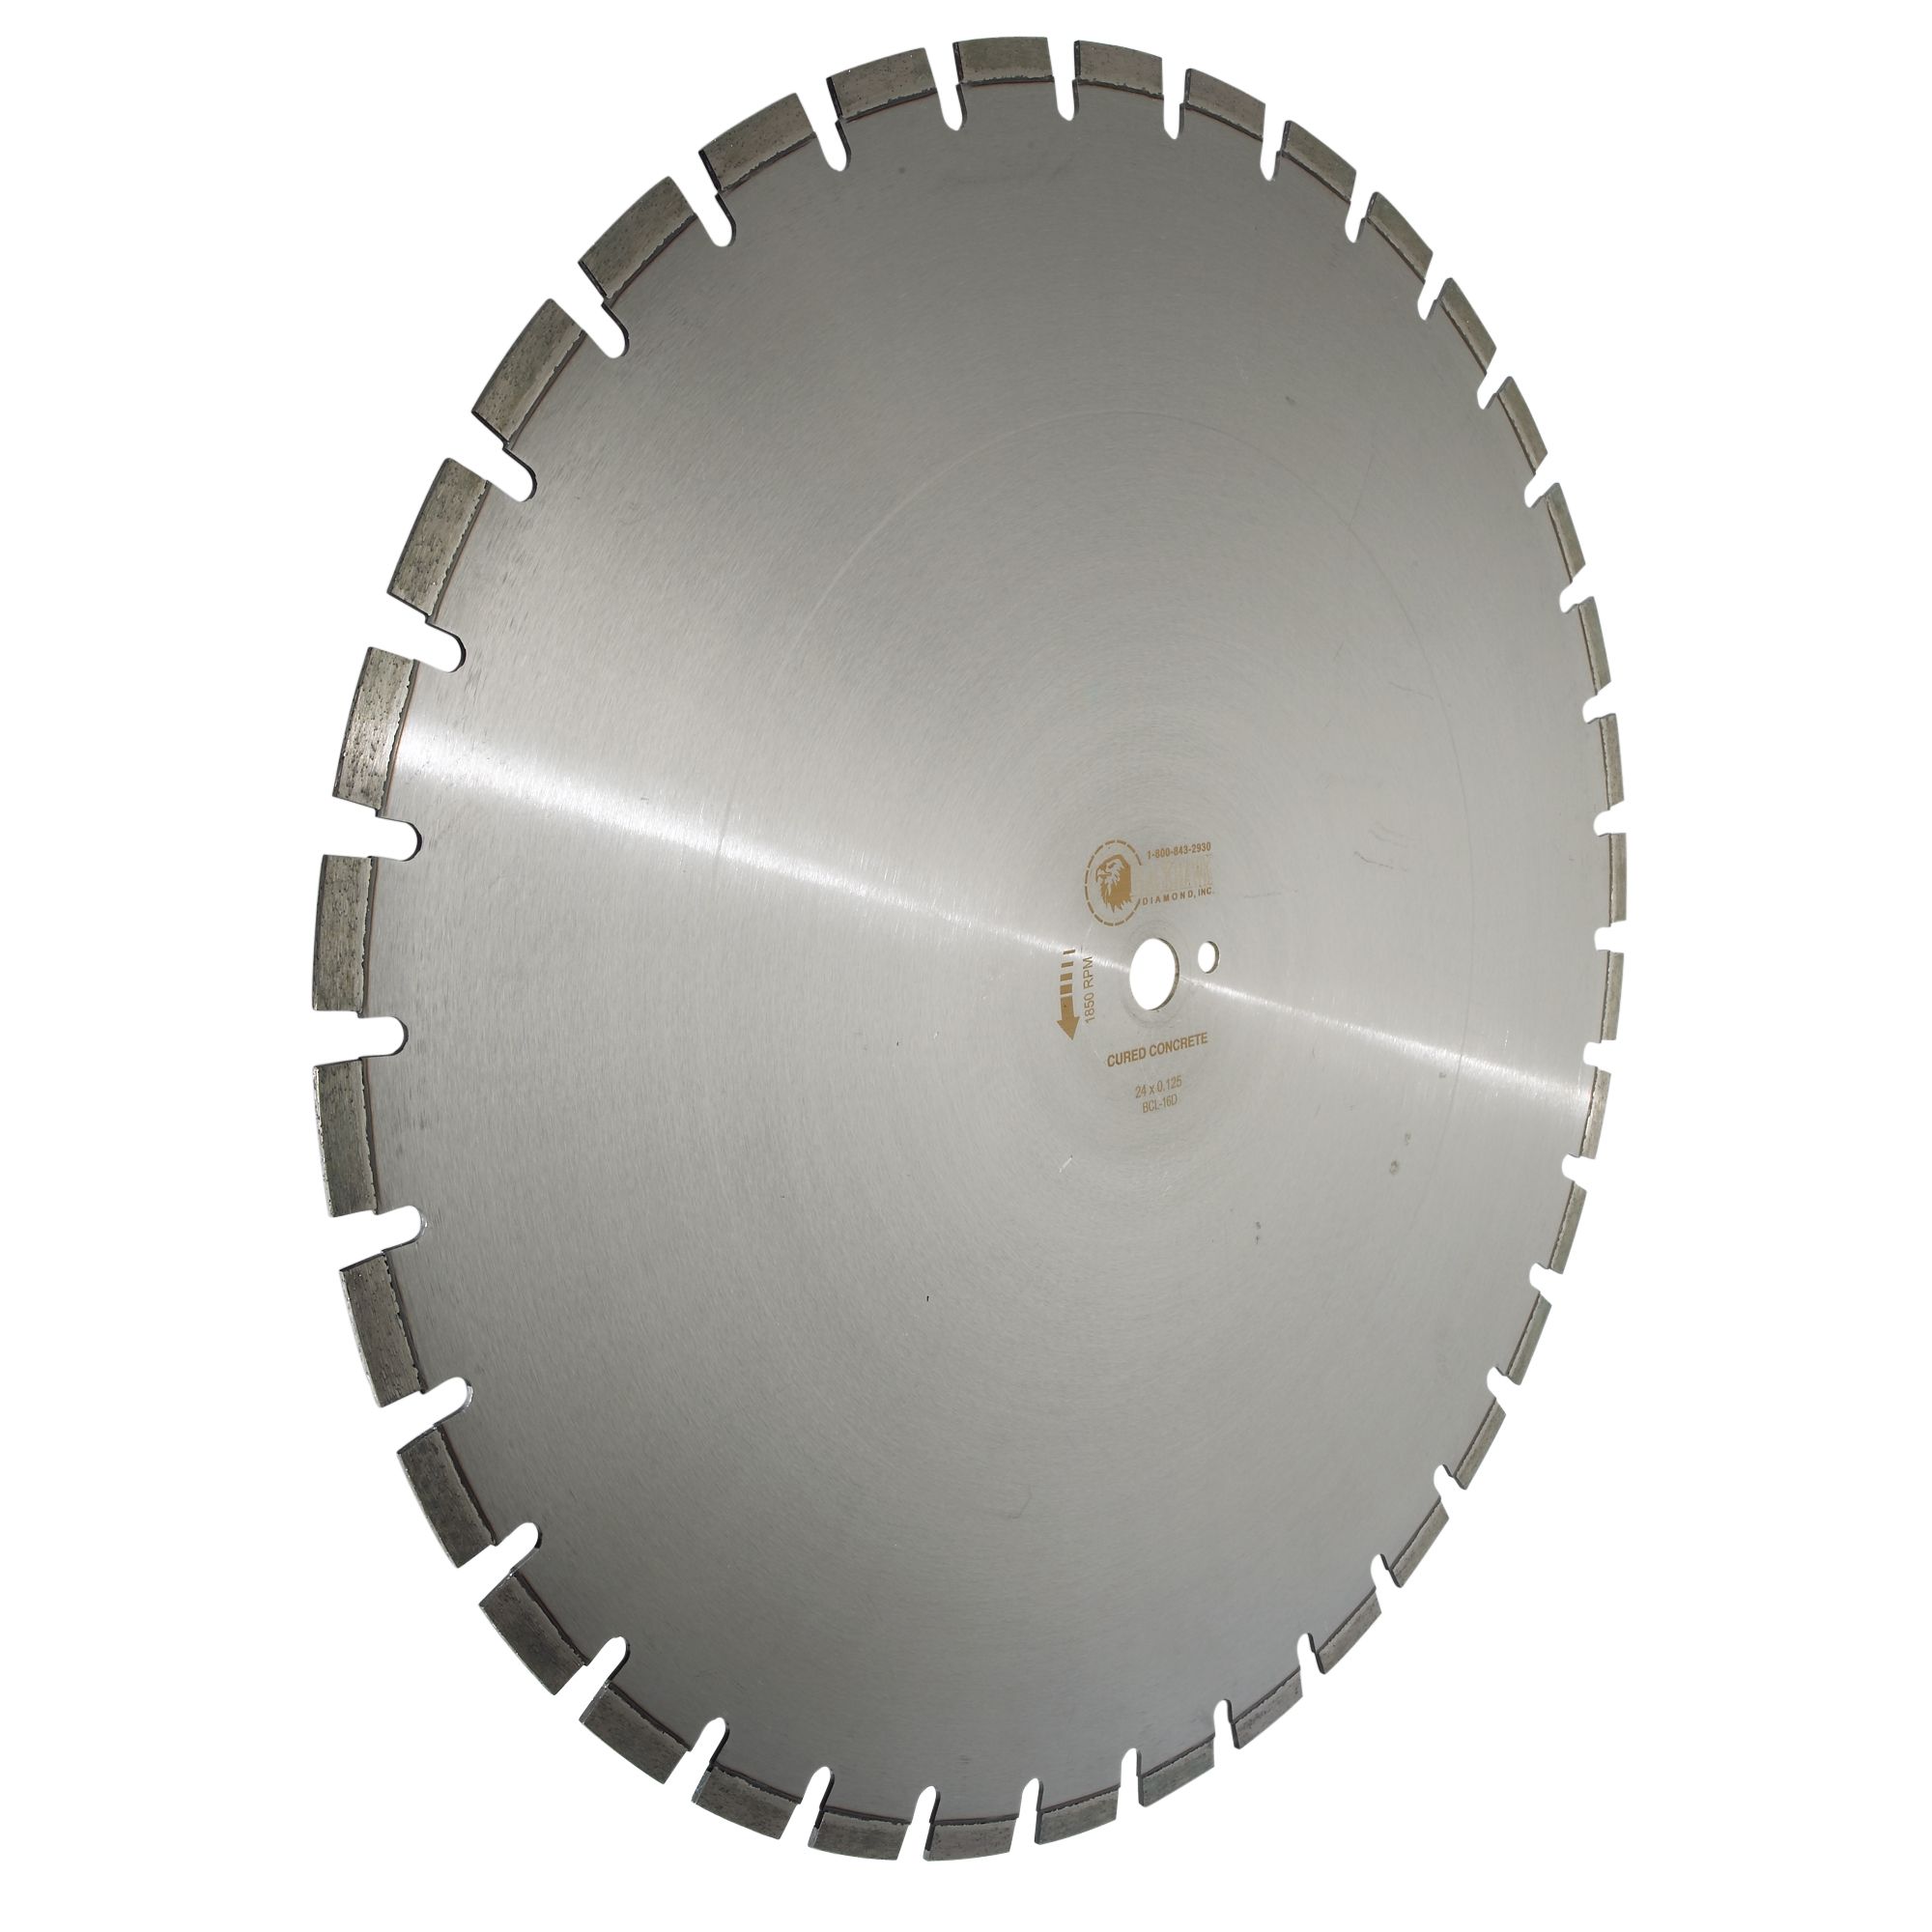 Planet Diamond CLOSEOUT!32 in. High Performance Segmented Blades, 10mm Rim Height